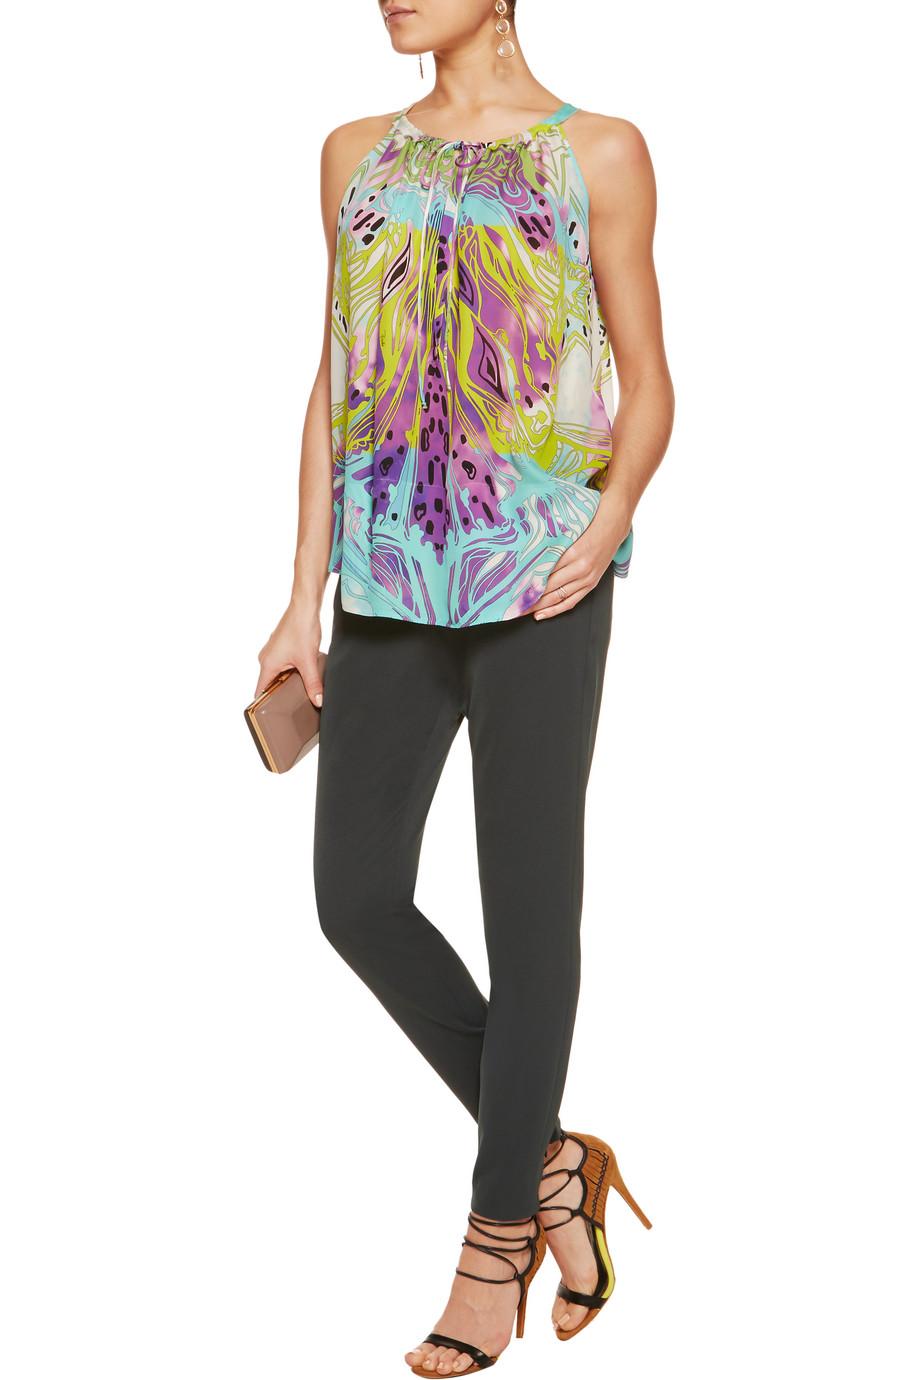 NEW Emilio Pucci Tie Dye Silk Star Print Top Shirt Sleeveless Blouse Tunic 40 For Sale 5